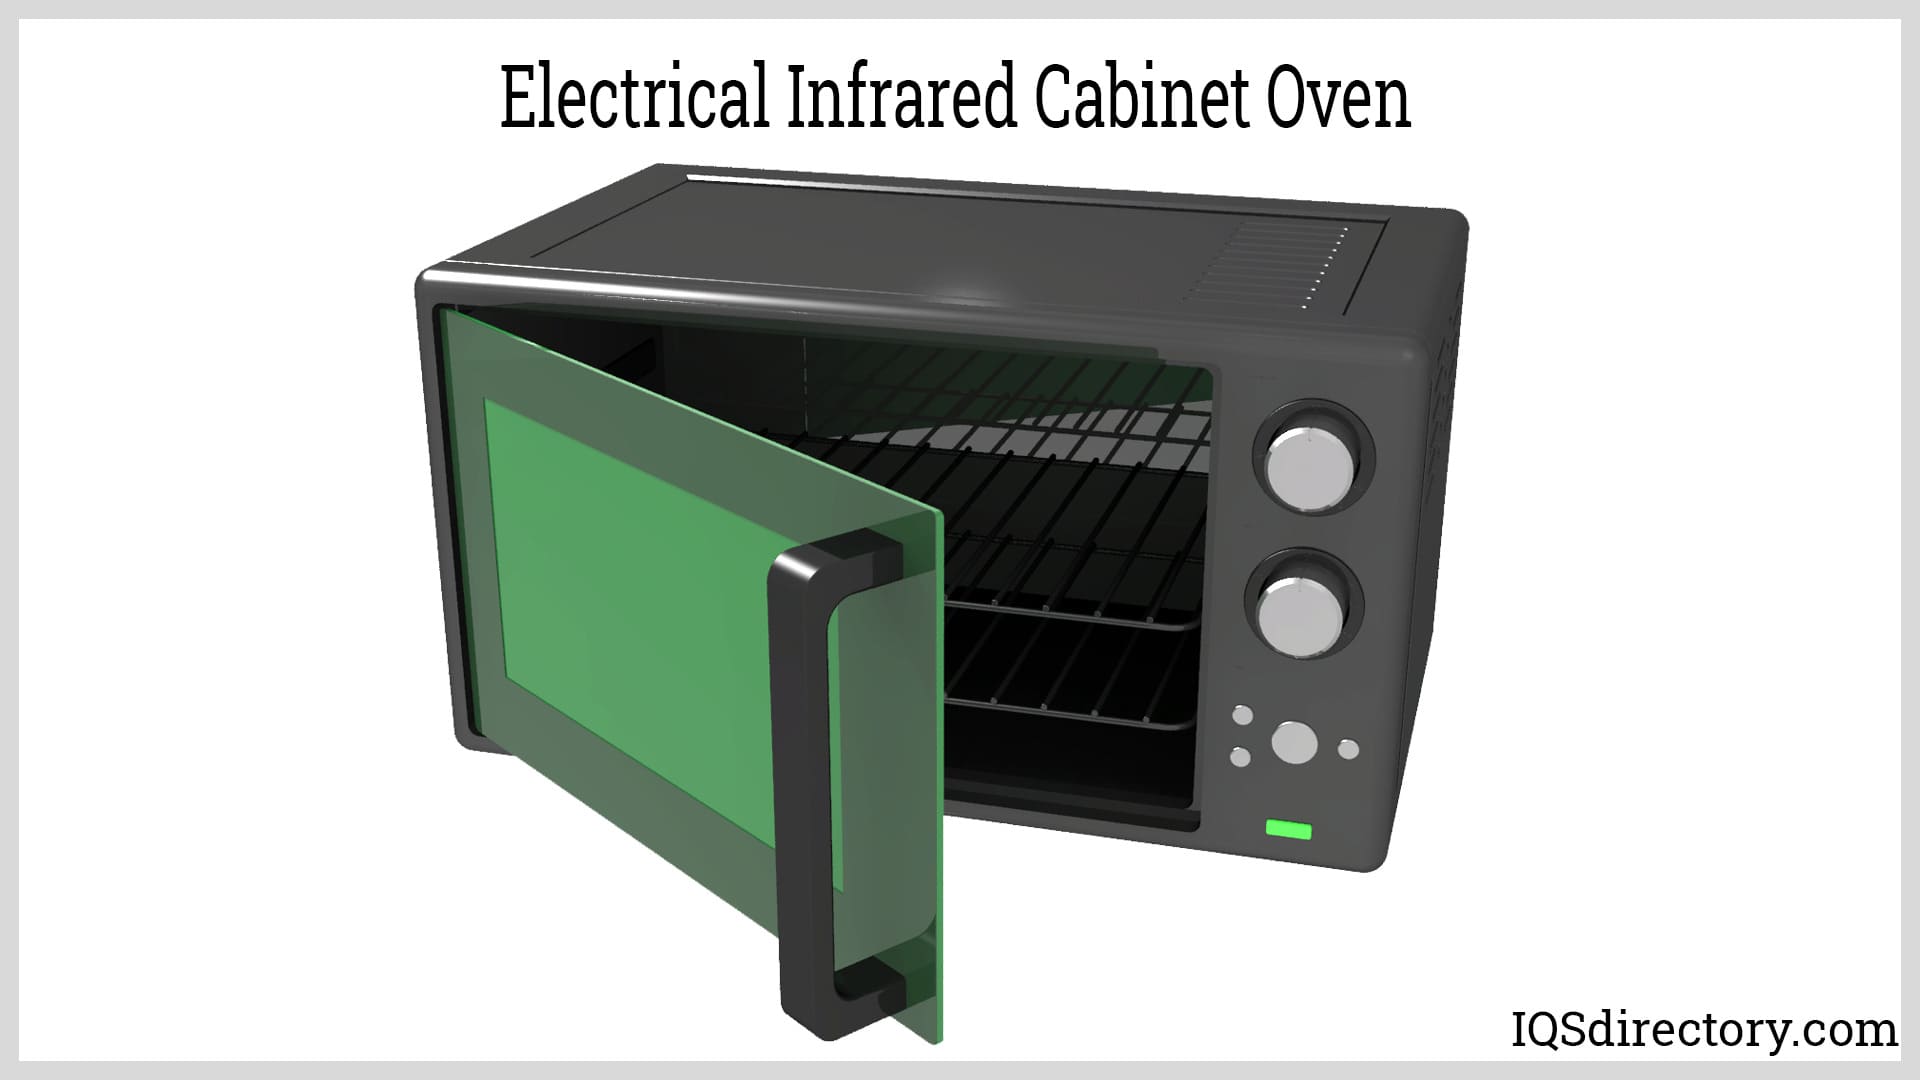 Electrical Infrared Cabinet Oven